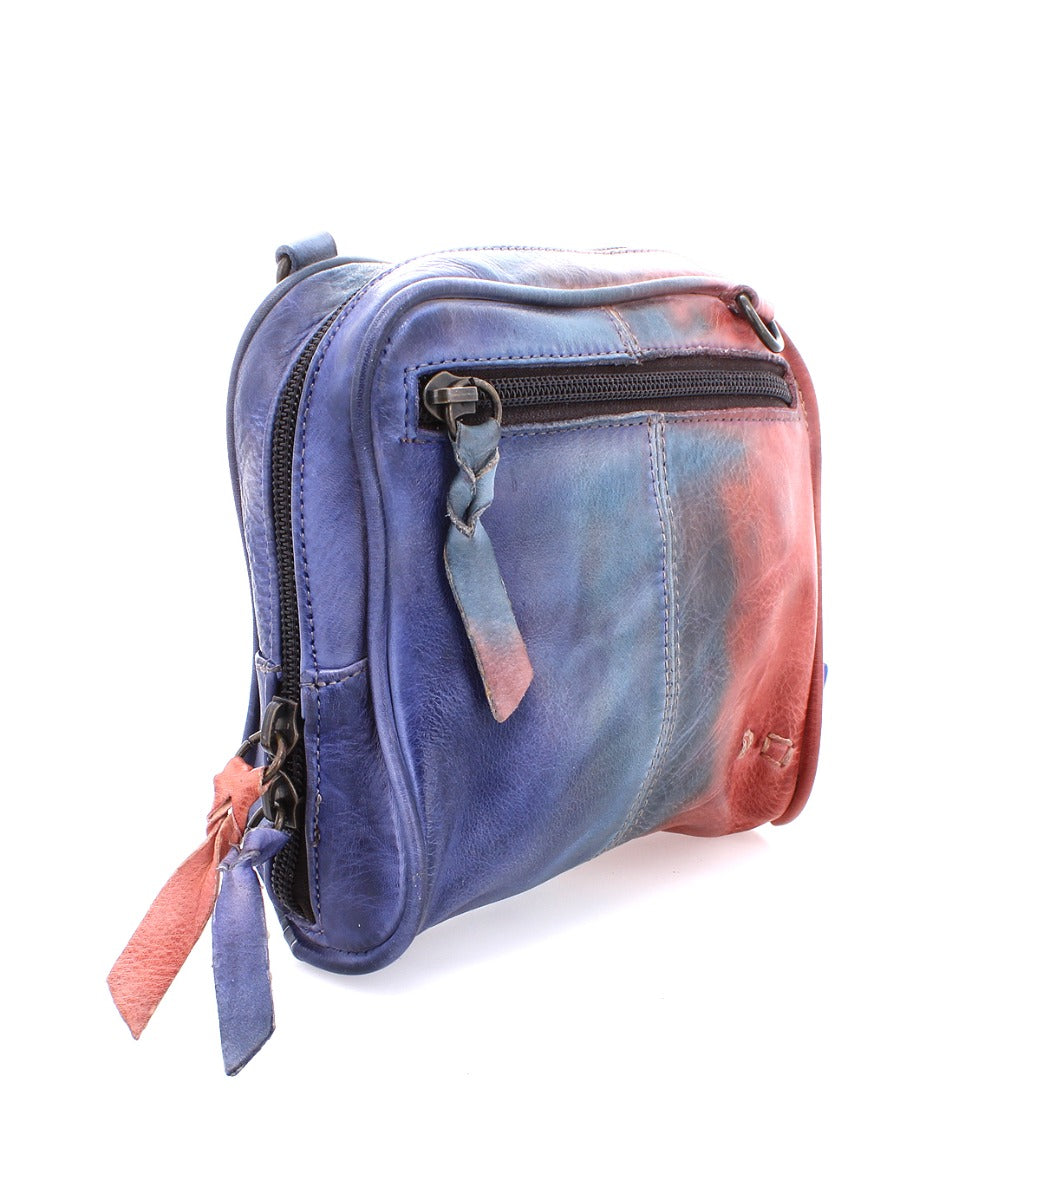 A small Capture purse with a tie dye pattern on it.